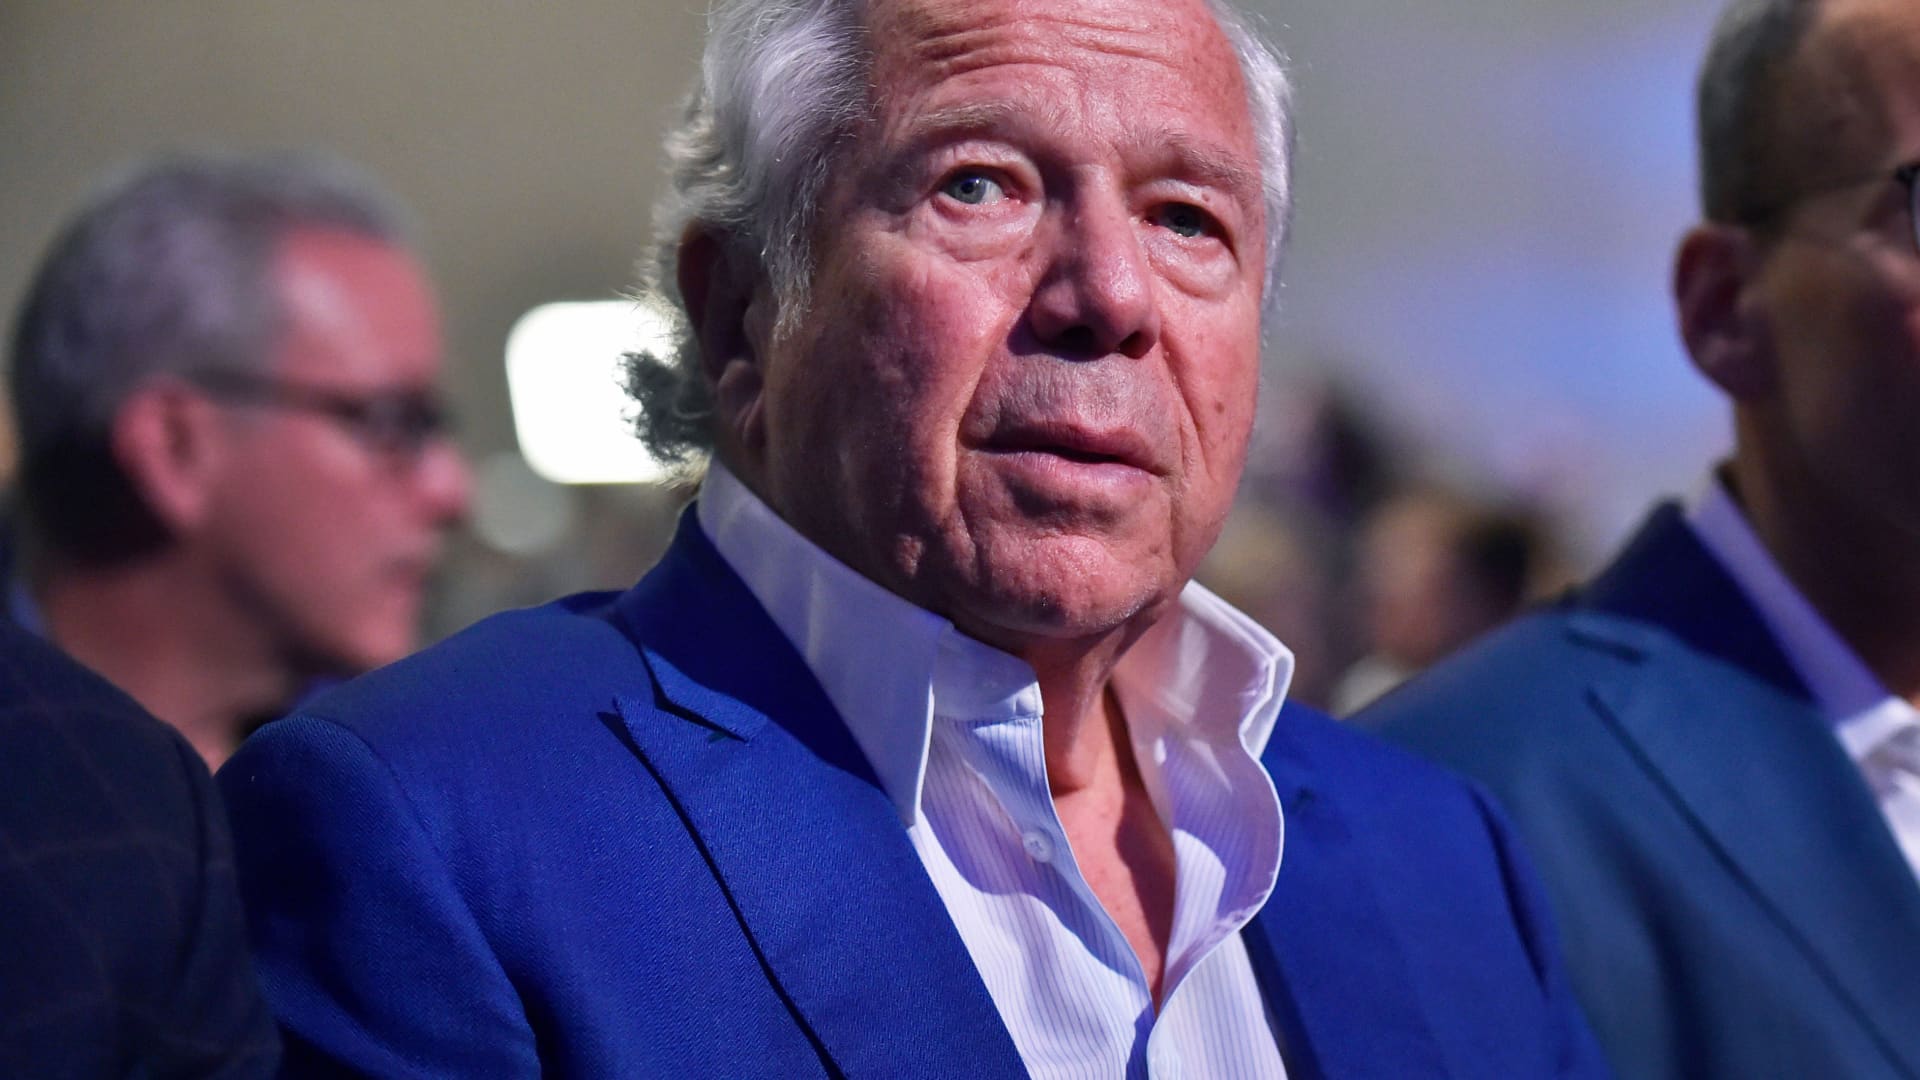 New England Patriots owner Robert Kraft listens to NFL Commissioner Roger Goodell speak to the media over various topics in the league leading up to Super Bowl LIII at the Georgia World Congress Center on January 30, 2019, in Atlanta, GA.